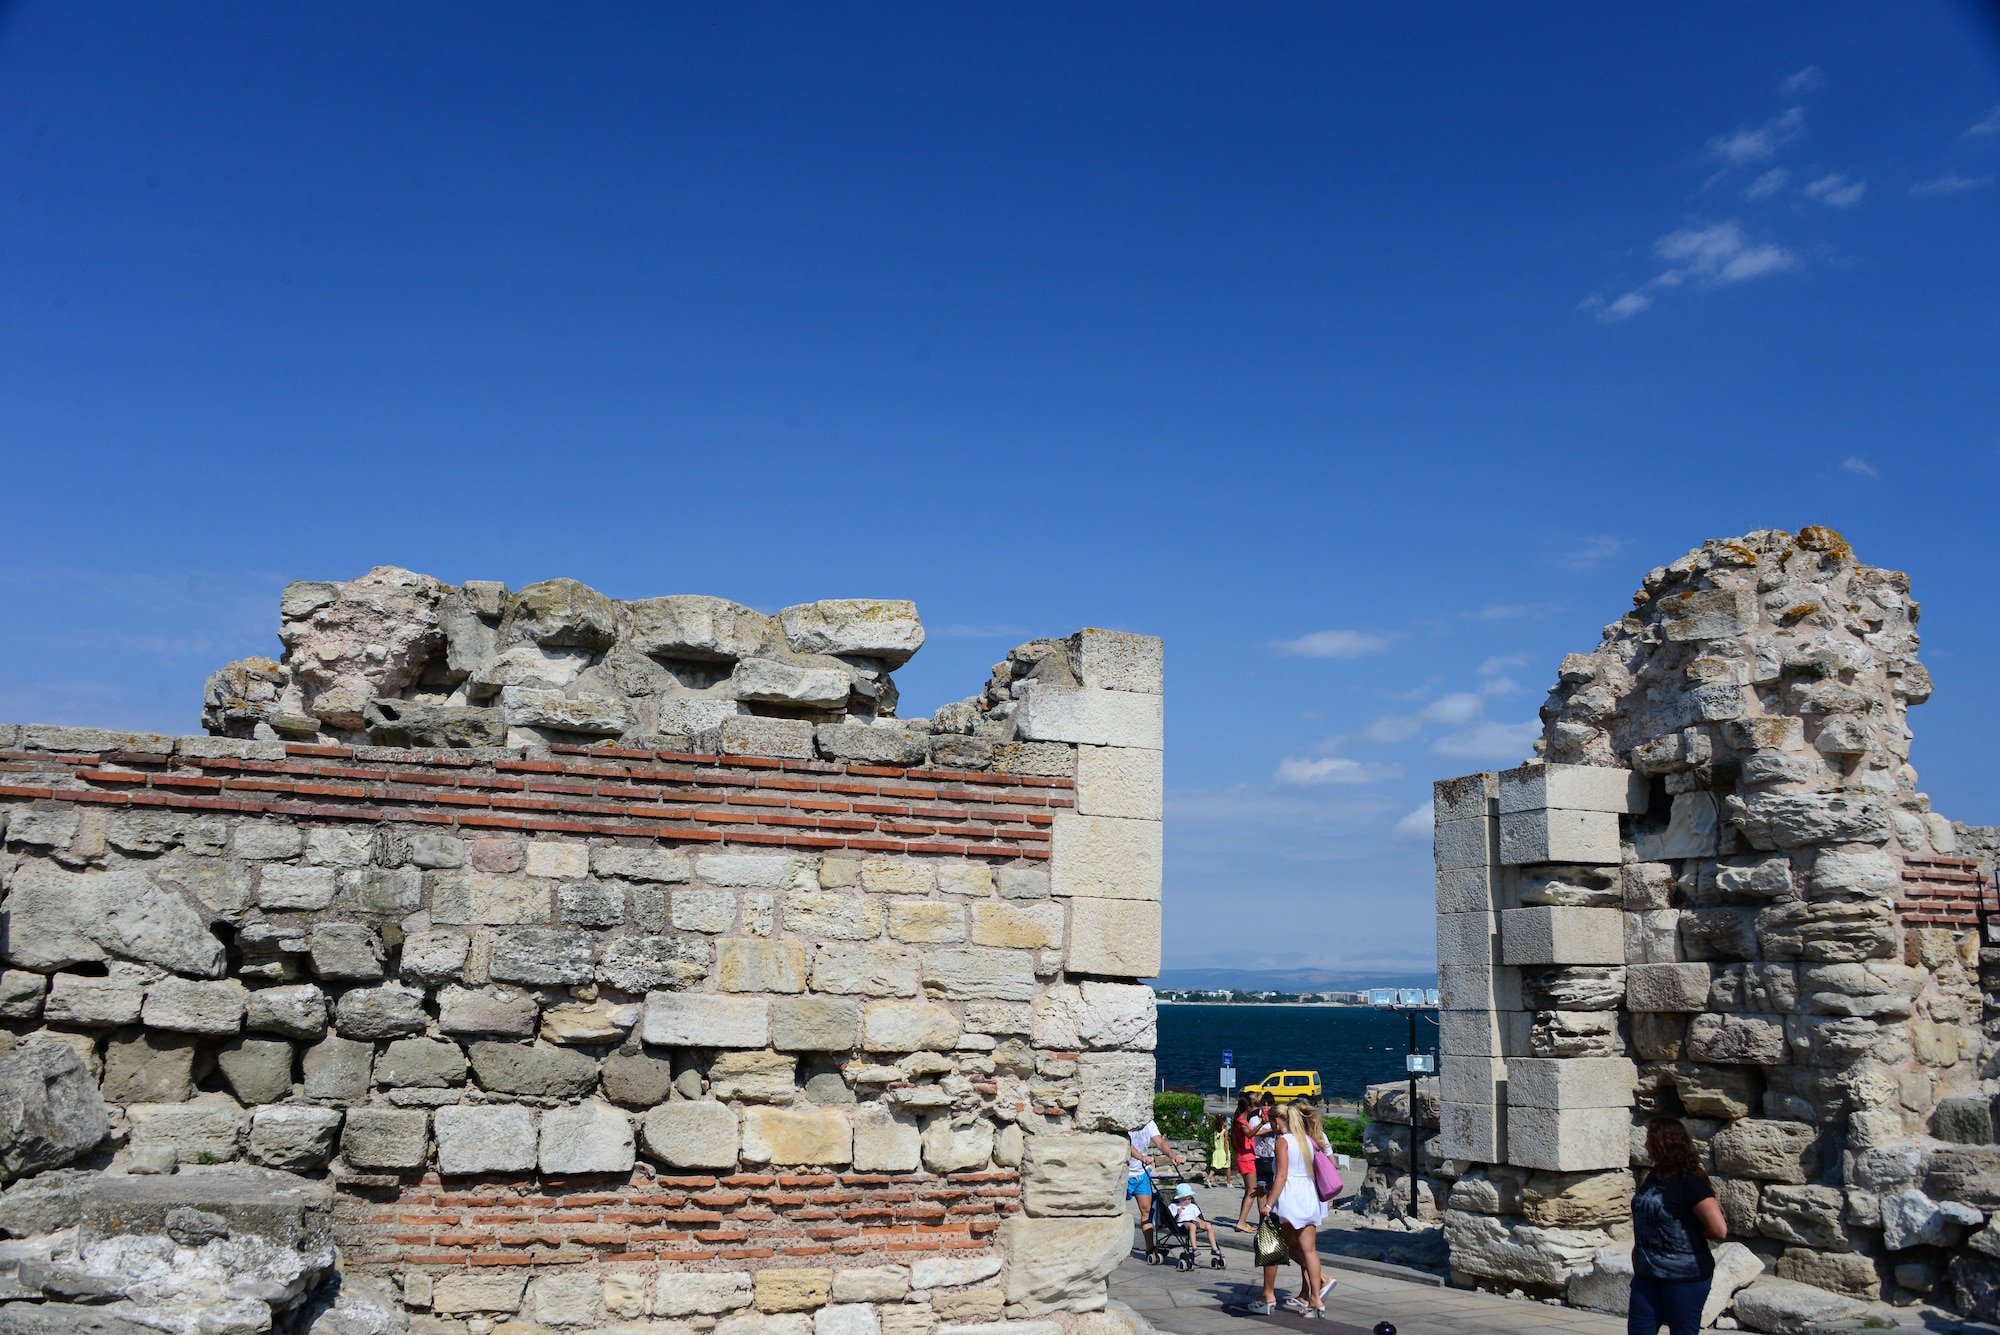 Visitors tour the old city ruins of Nessebar, Bulgaria, an ancient settlement along the Black Sea.  Airmen and Soldiers toured the area as part of a  Morale Wellness and Recreation event Aug. 12., 2016 while deployed to Novo Selo Training Area, Bulgaria.  Tennessee National Guard Soldiers and Airmen were on rotations as part of Operation Resolute Castle 16, an ongoing operation of military construction to build up Eastern European base infrastructure and help strengthen ties between Tennessee's state partnership with Bulgaria.  (U.S. Air National Guard photo by Master Sgt. Kendra M. Owenby, 134 ARW Public Affairs)